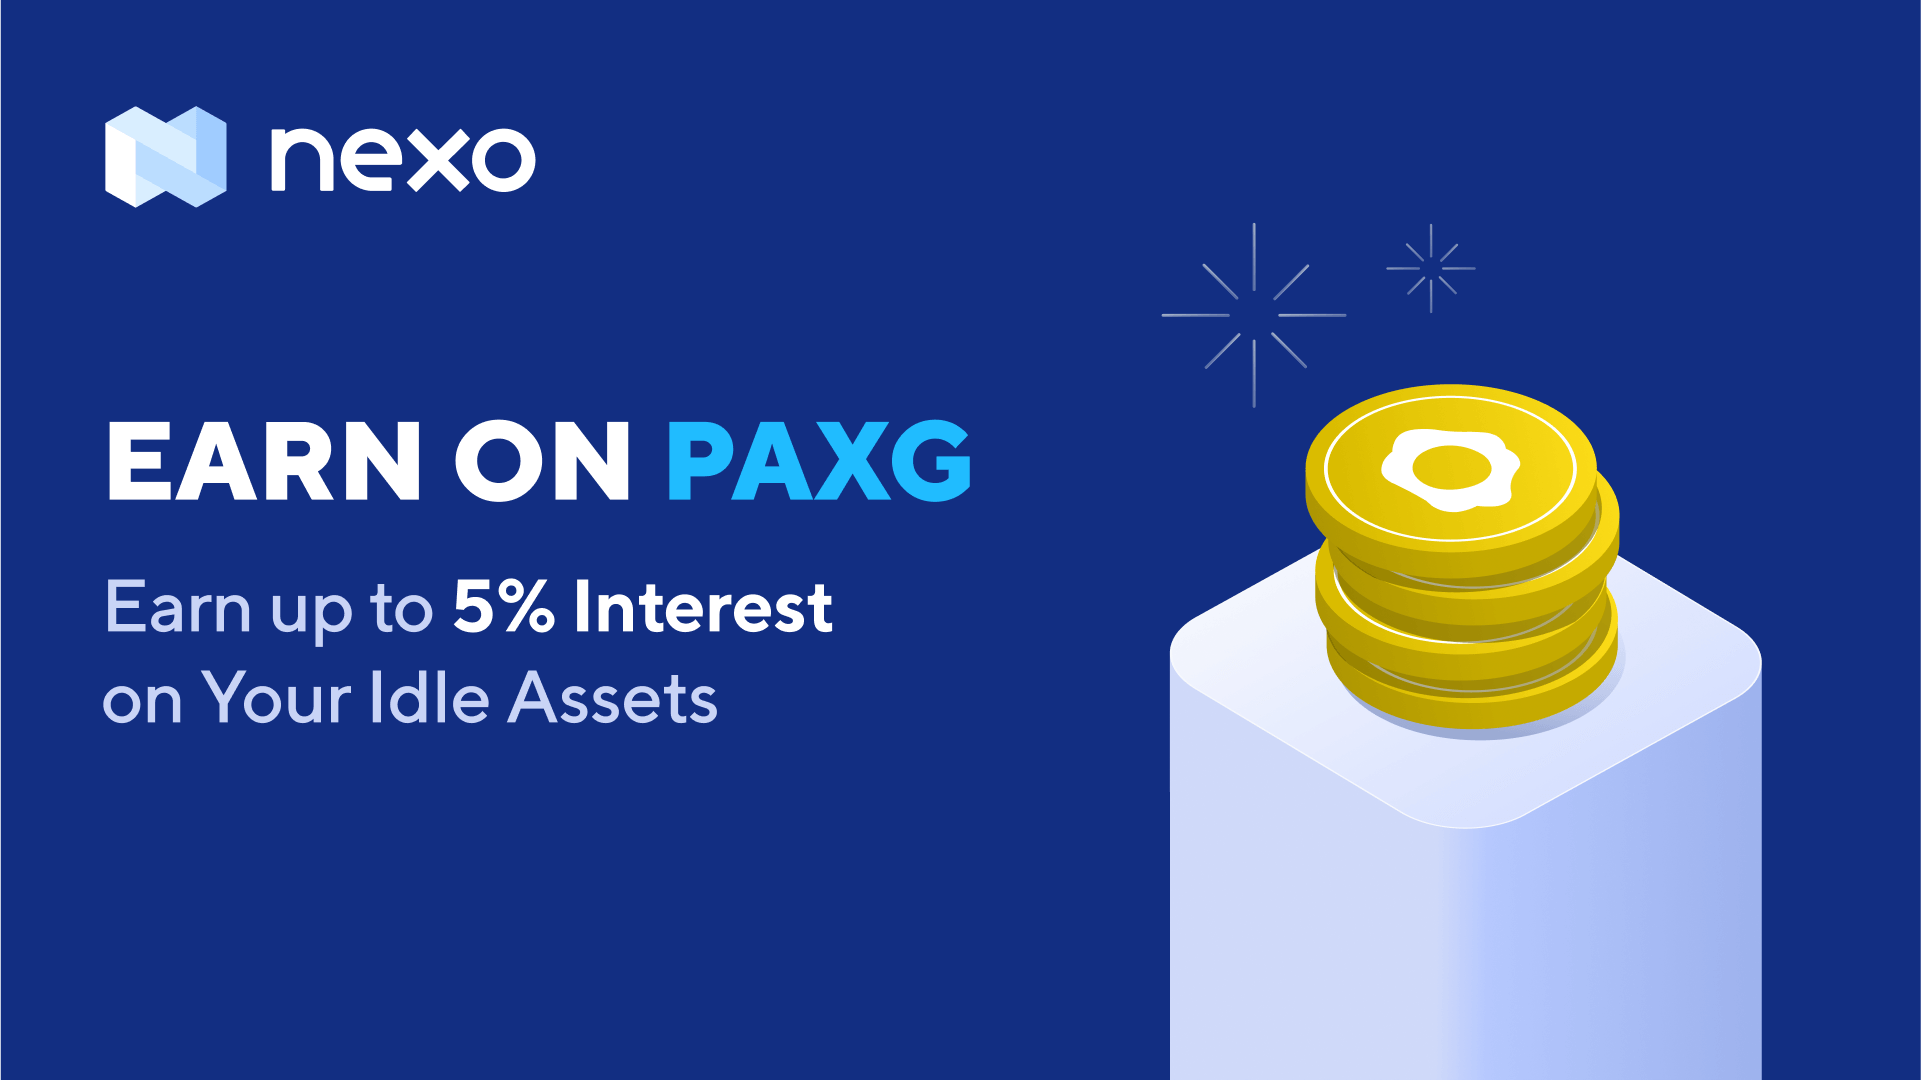 A Golden Opportunity: PAXG Now Available for Earn on Crypto